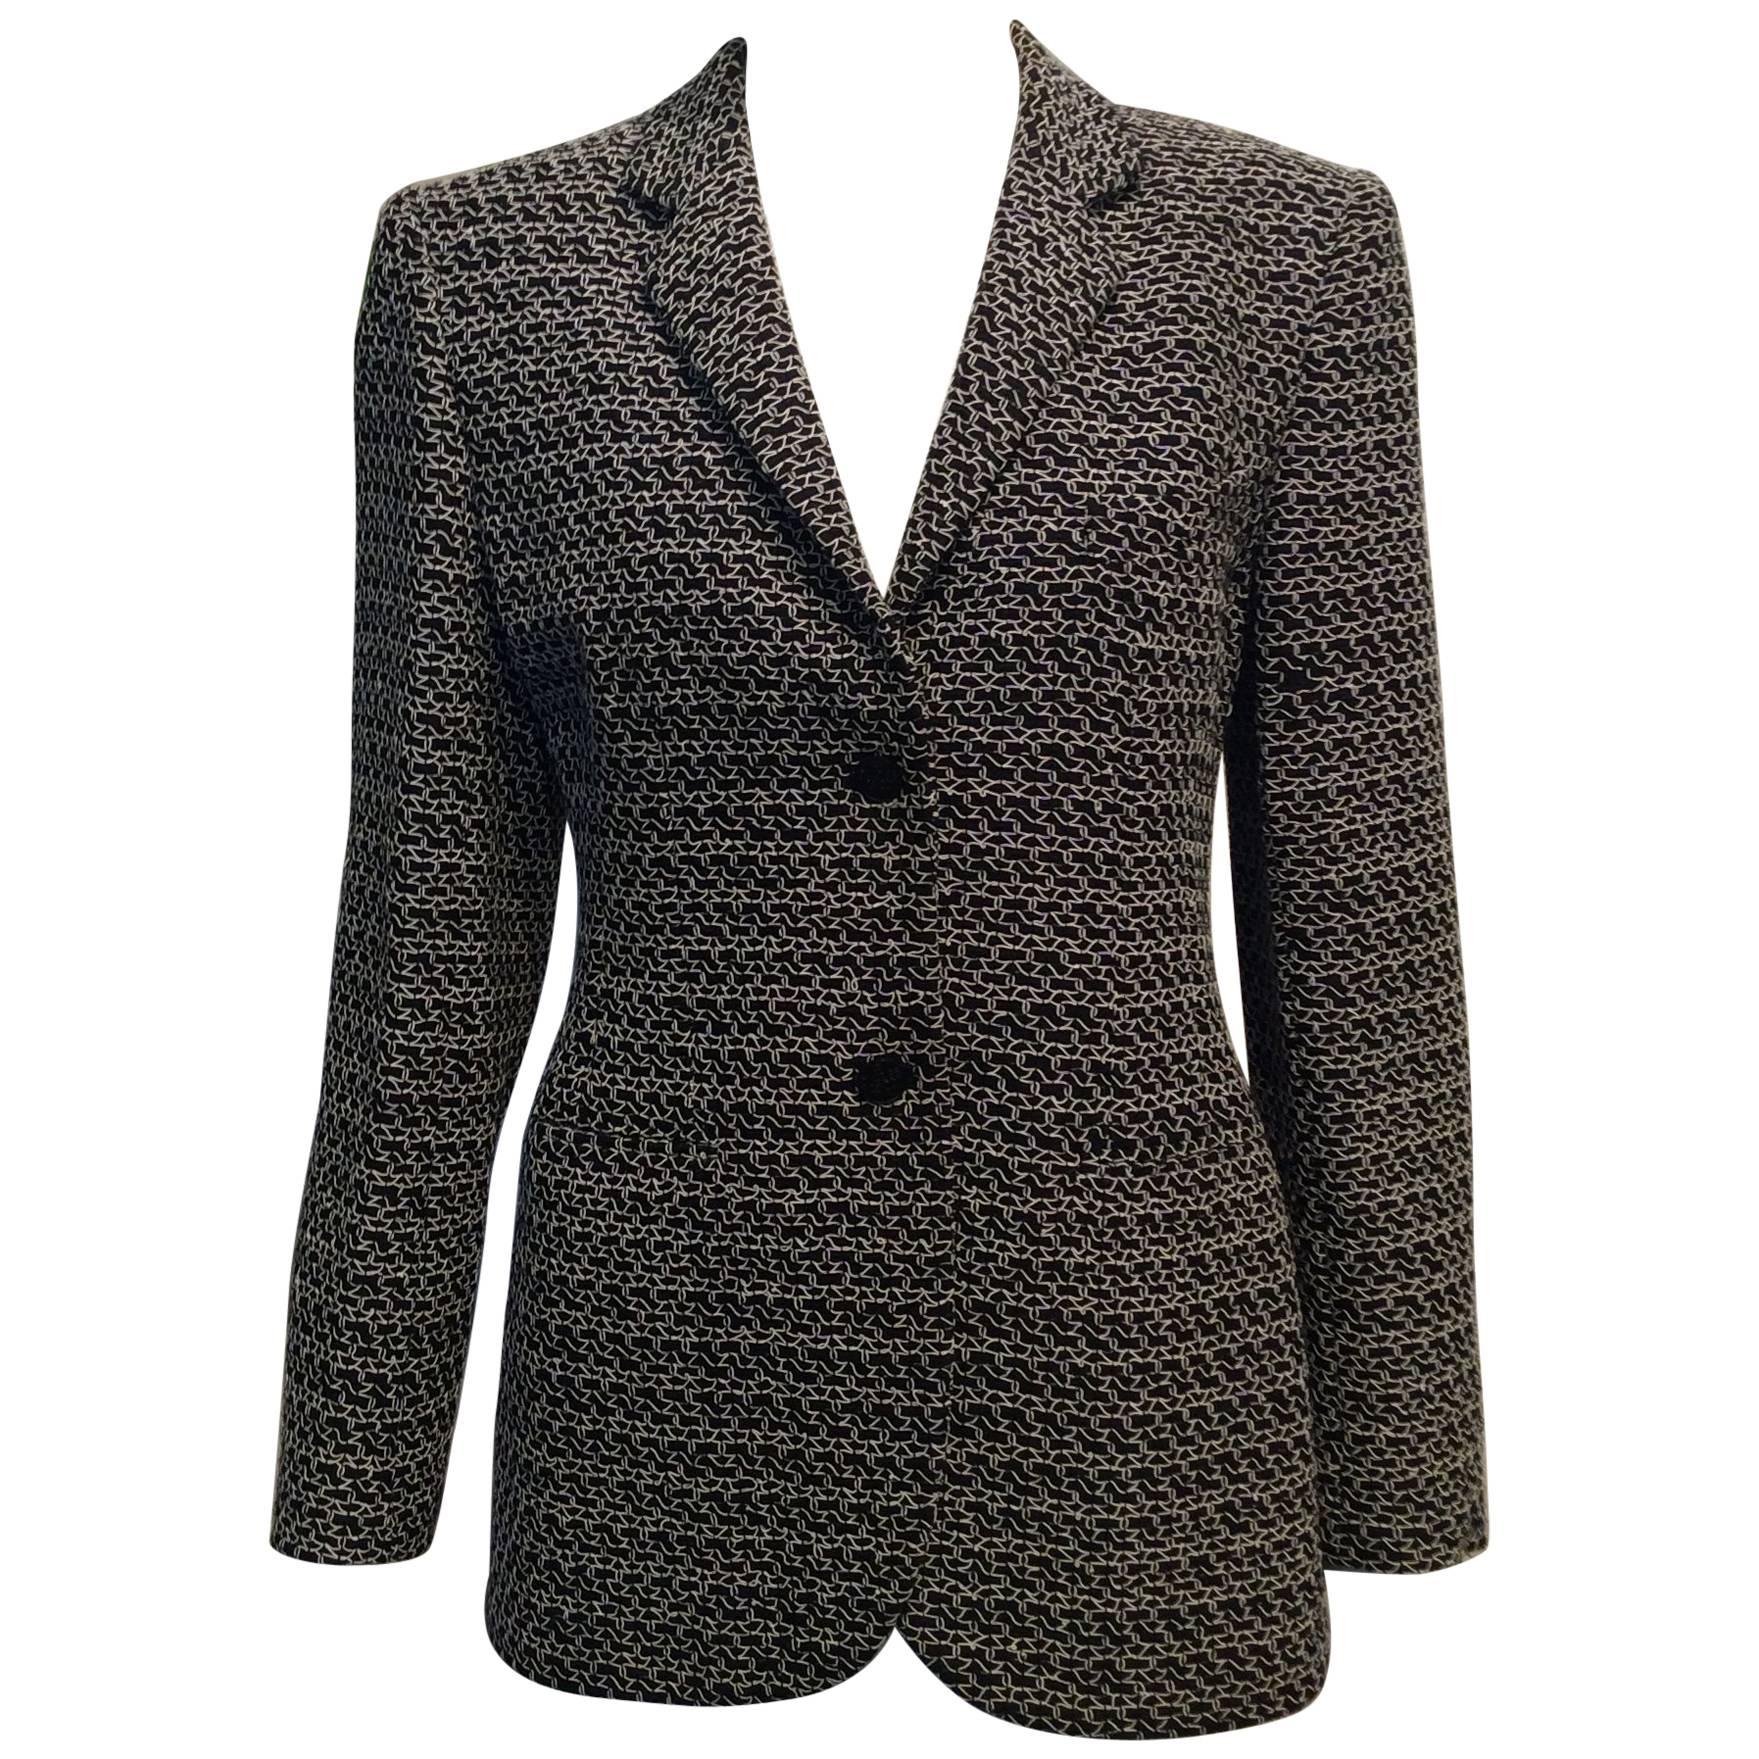 Chanel Black and White Woven Tweed Jacket with Black Buttons   For Sale